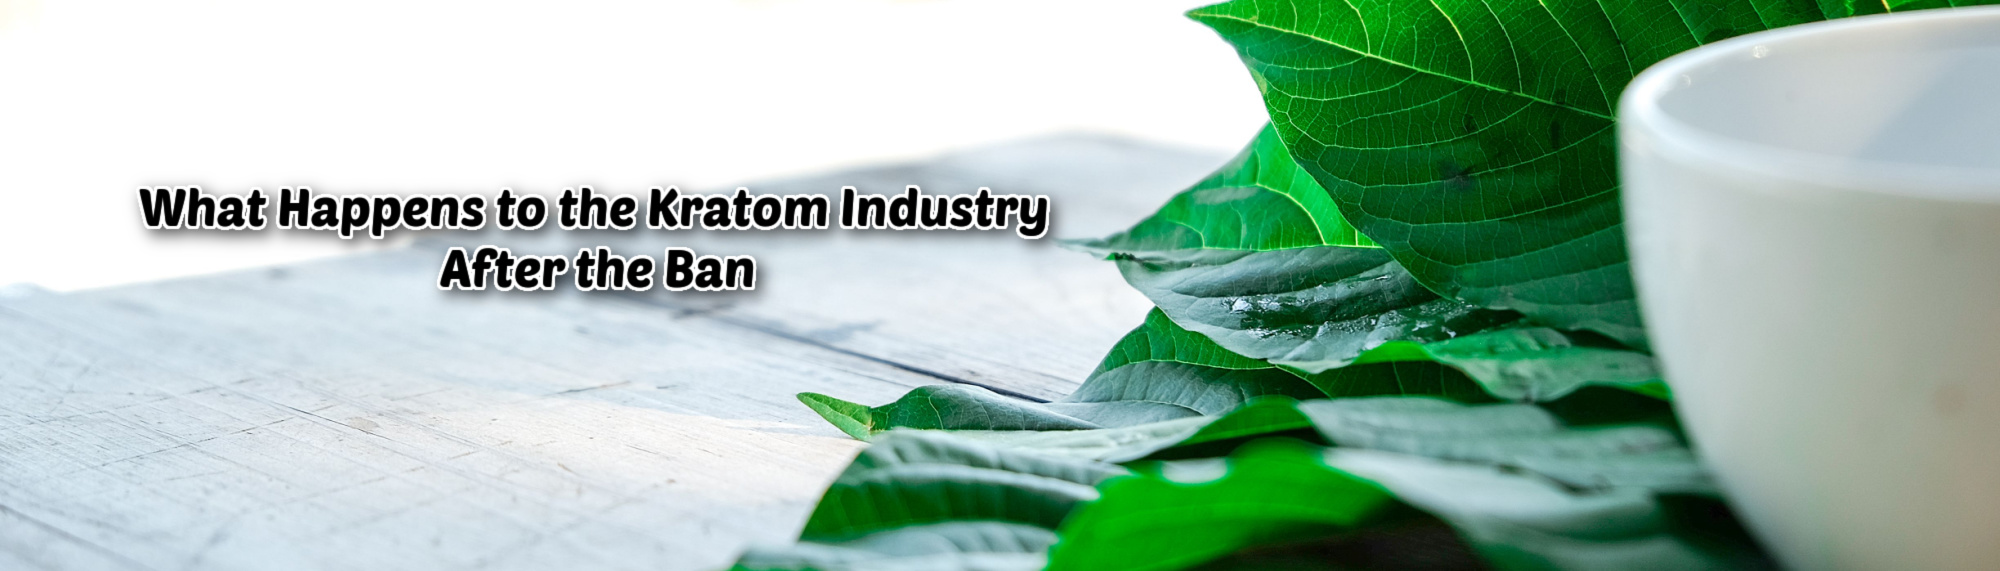 image of what happens to the kratom industry after the ban